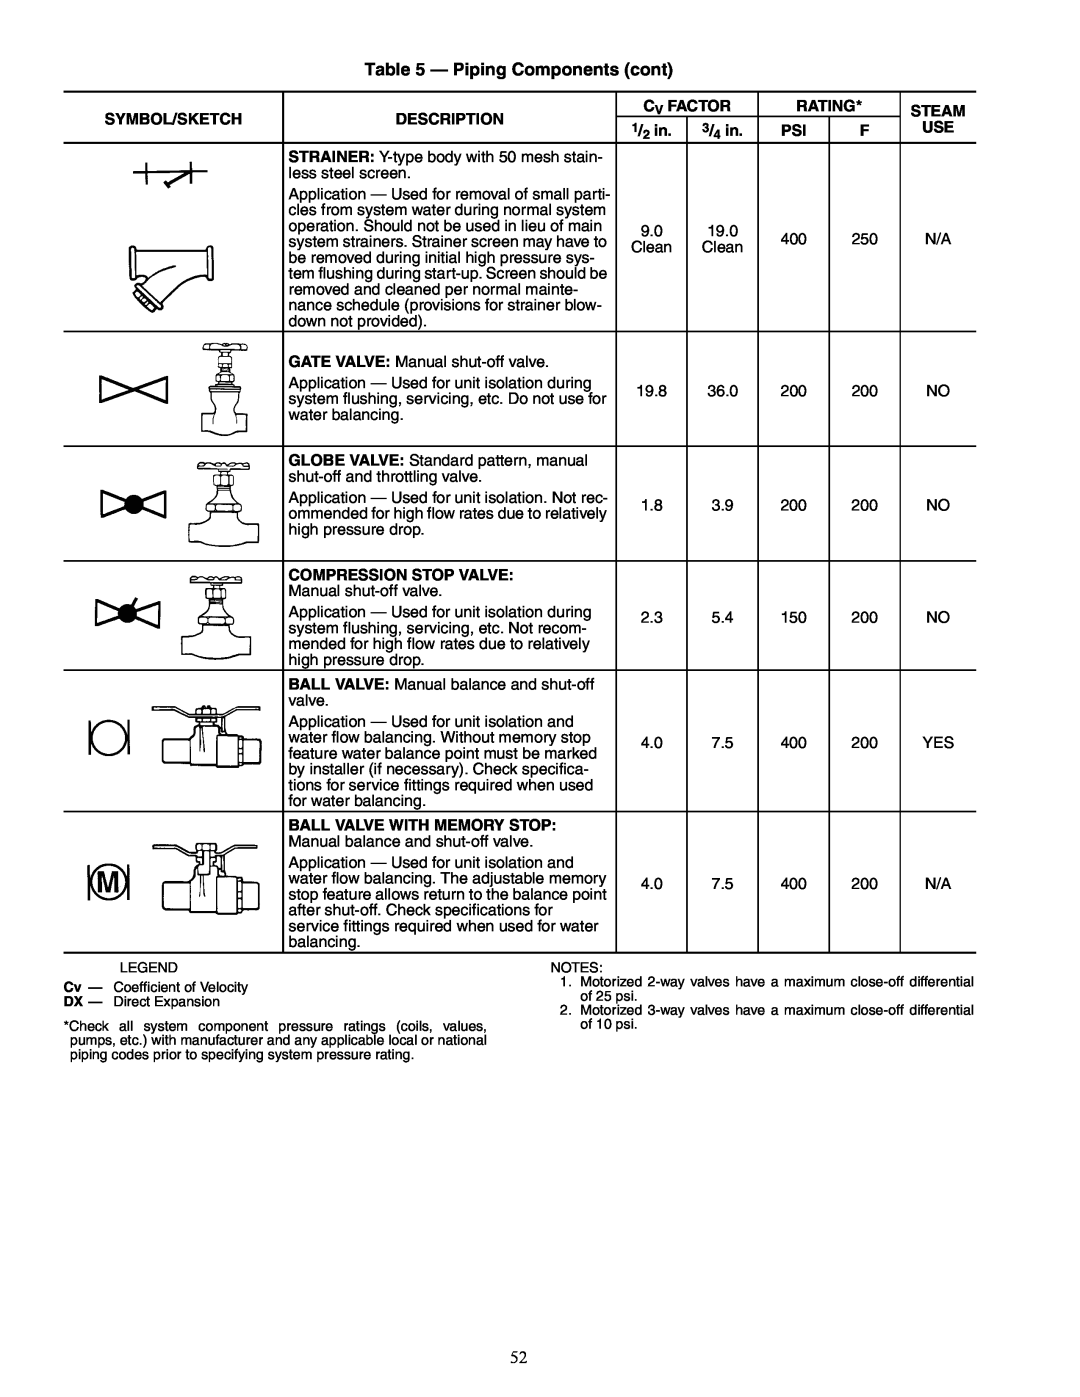 Carrier 42C, 42S, 42D, 42V specifications Piping Components cont, Symbol/Sketch 